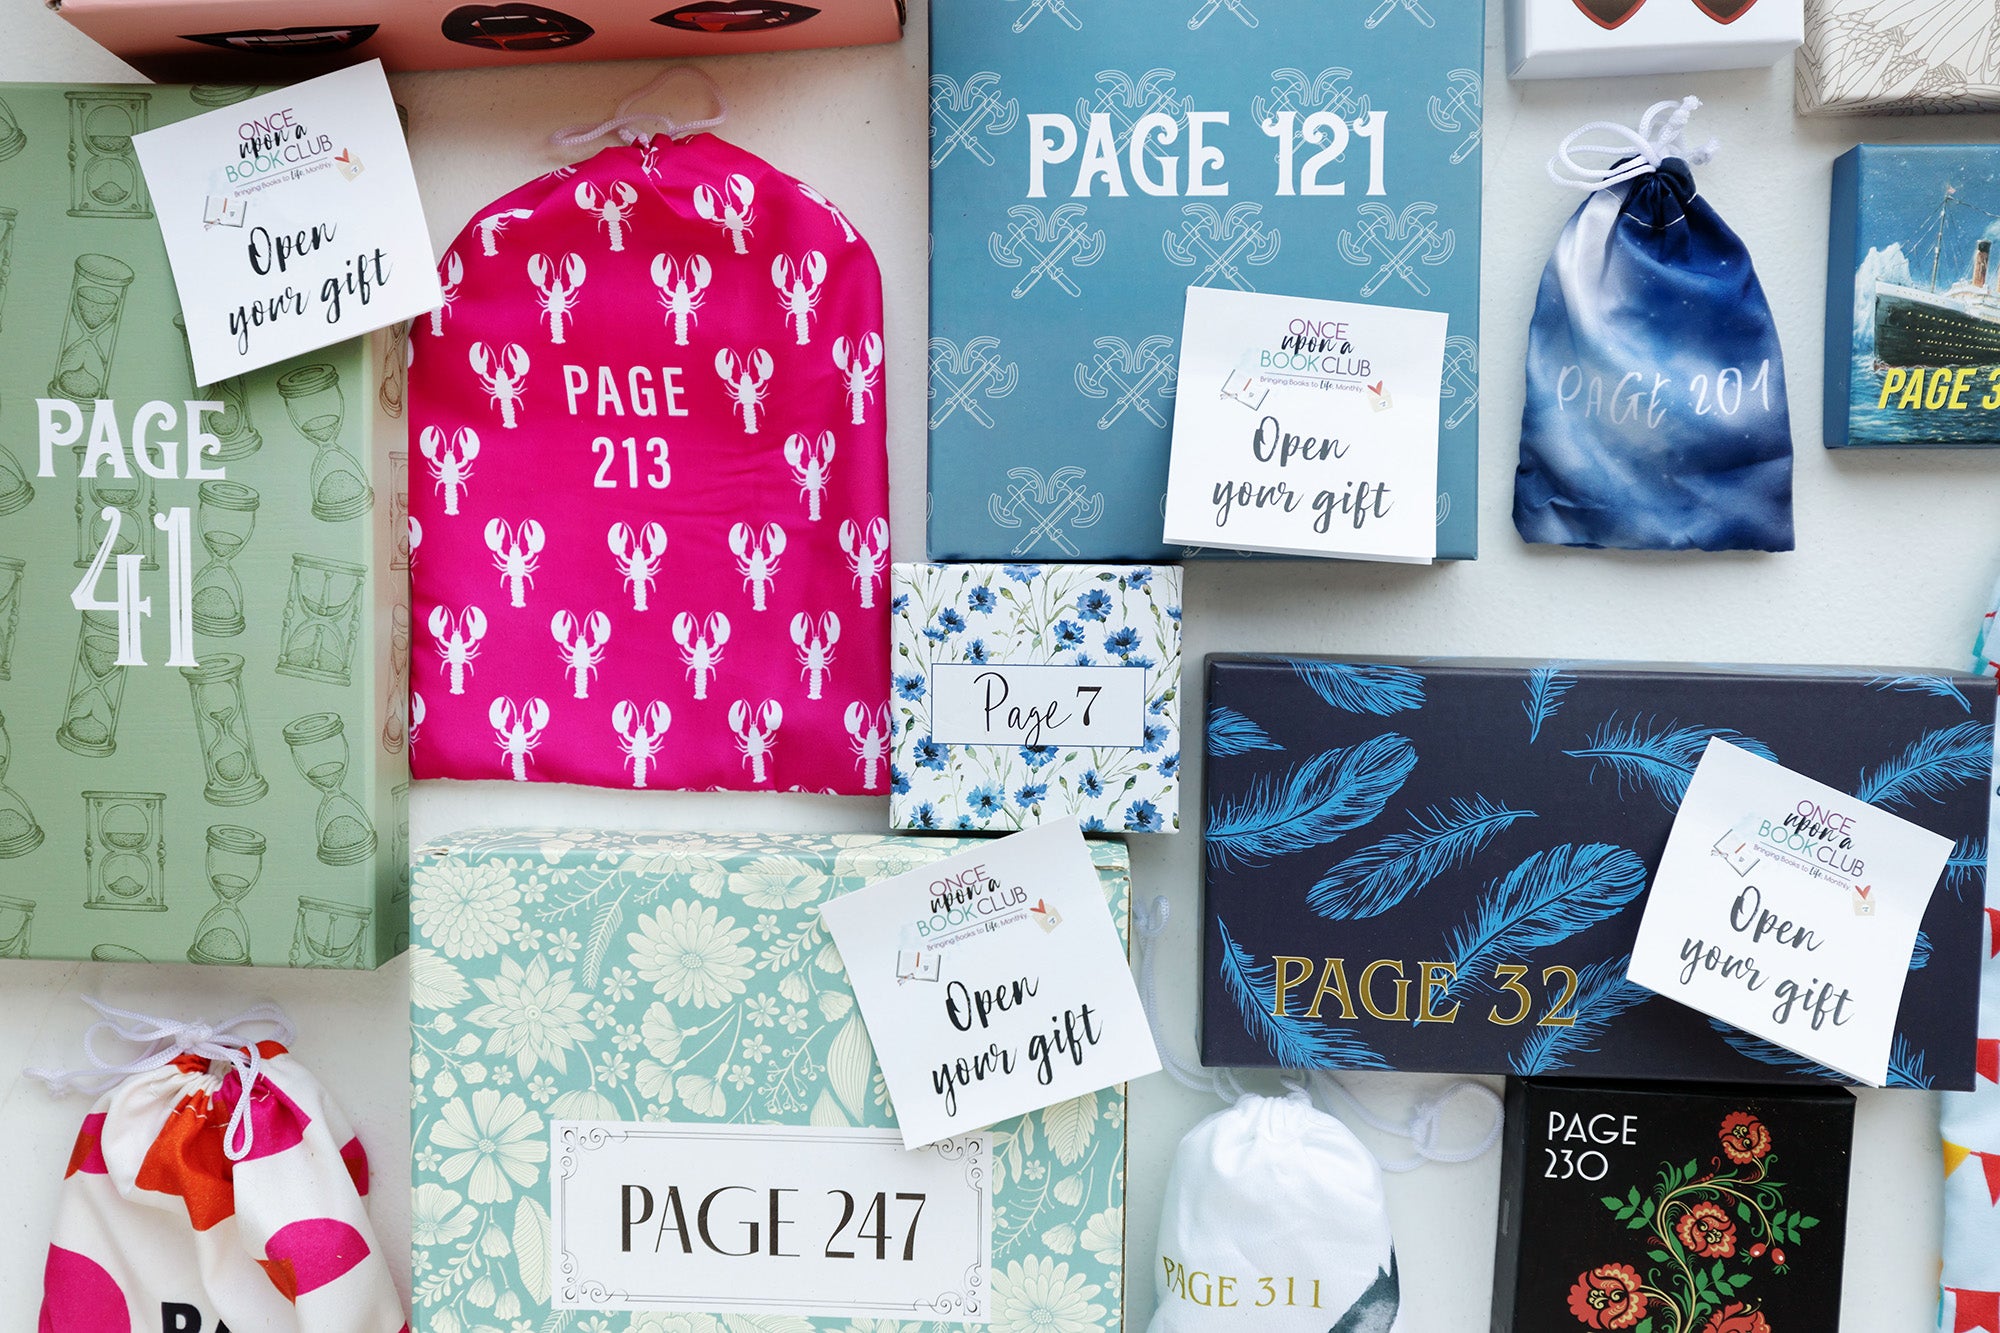 boxes and drawstrings bags of varying sizes and colors are in a flatlay image with multiple "open your gift" sticky notes over top of them